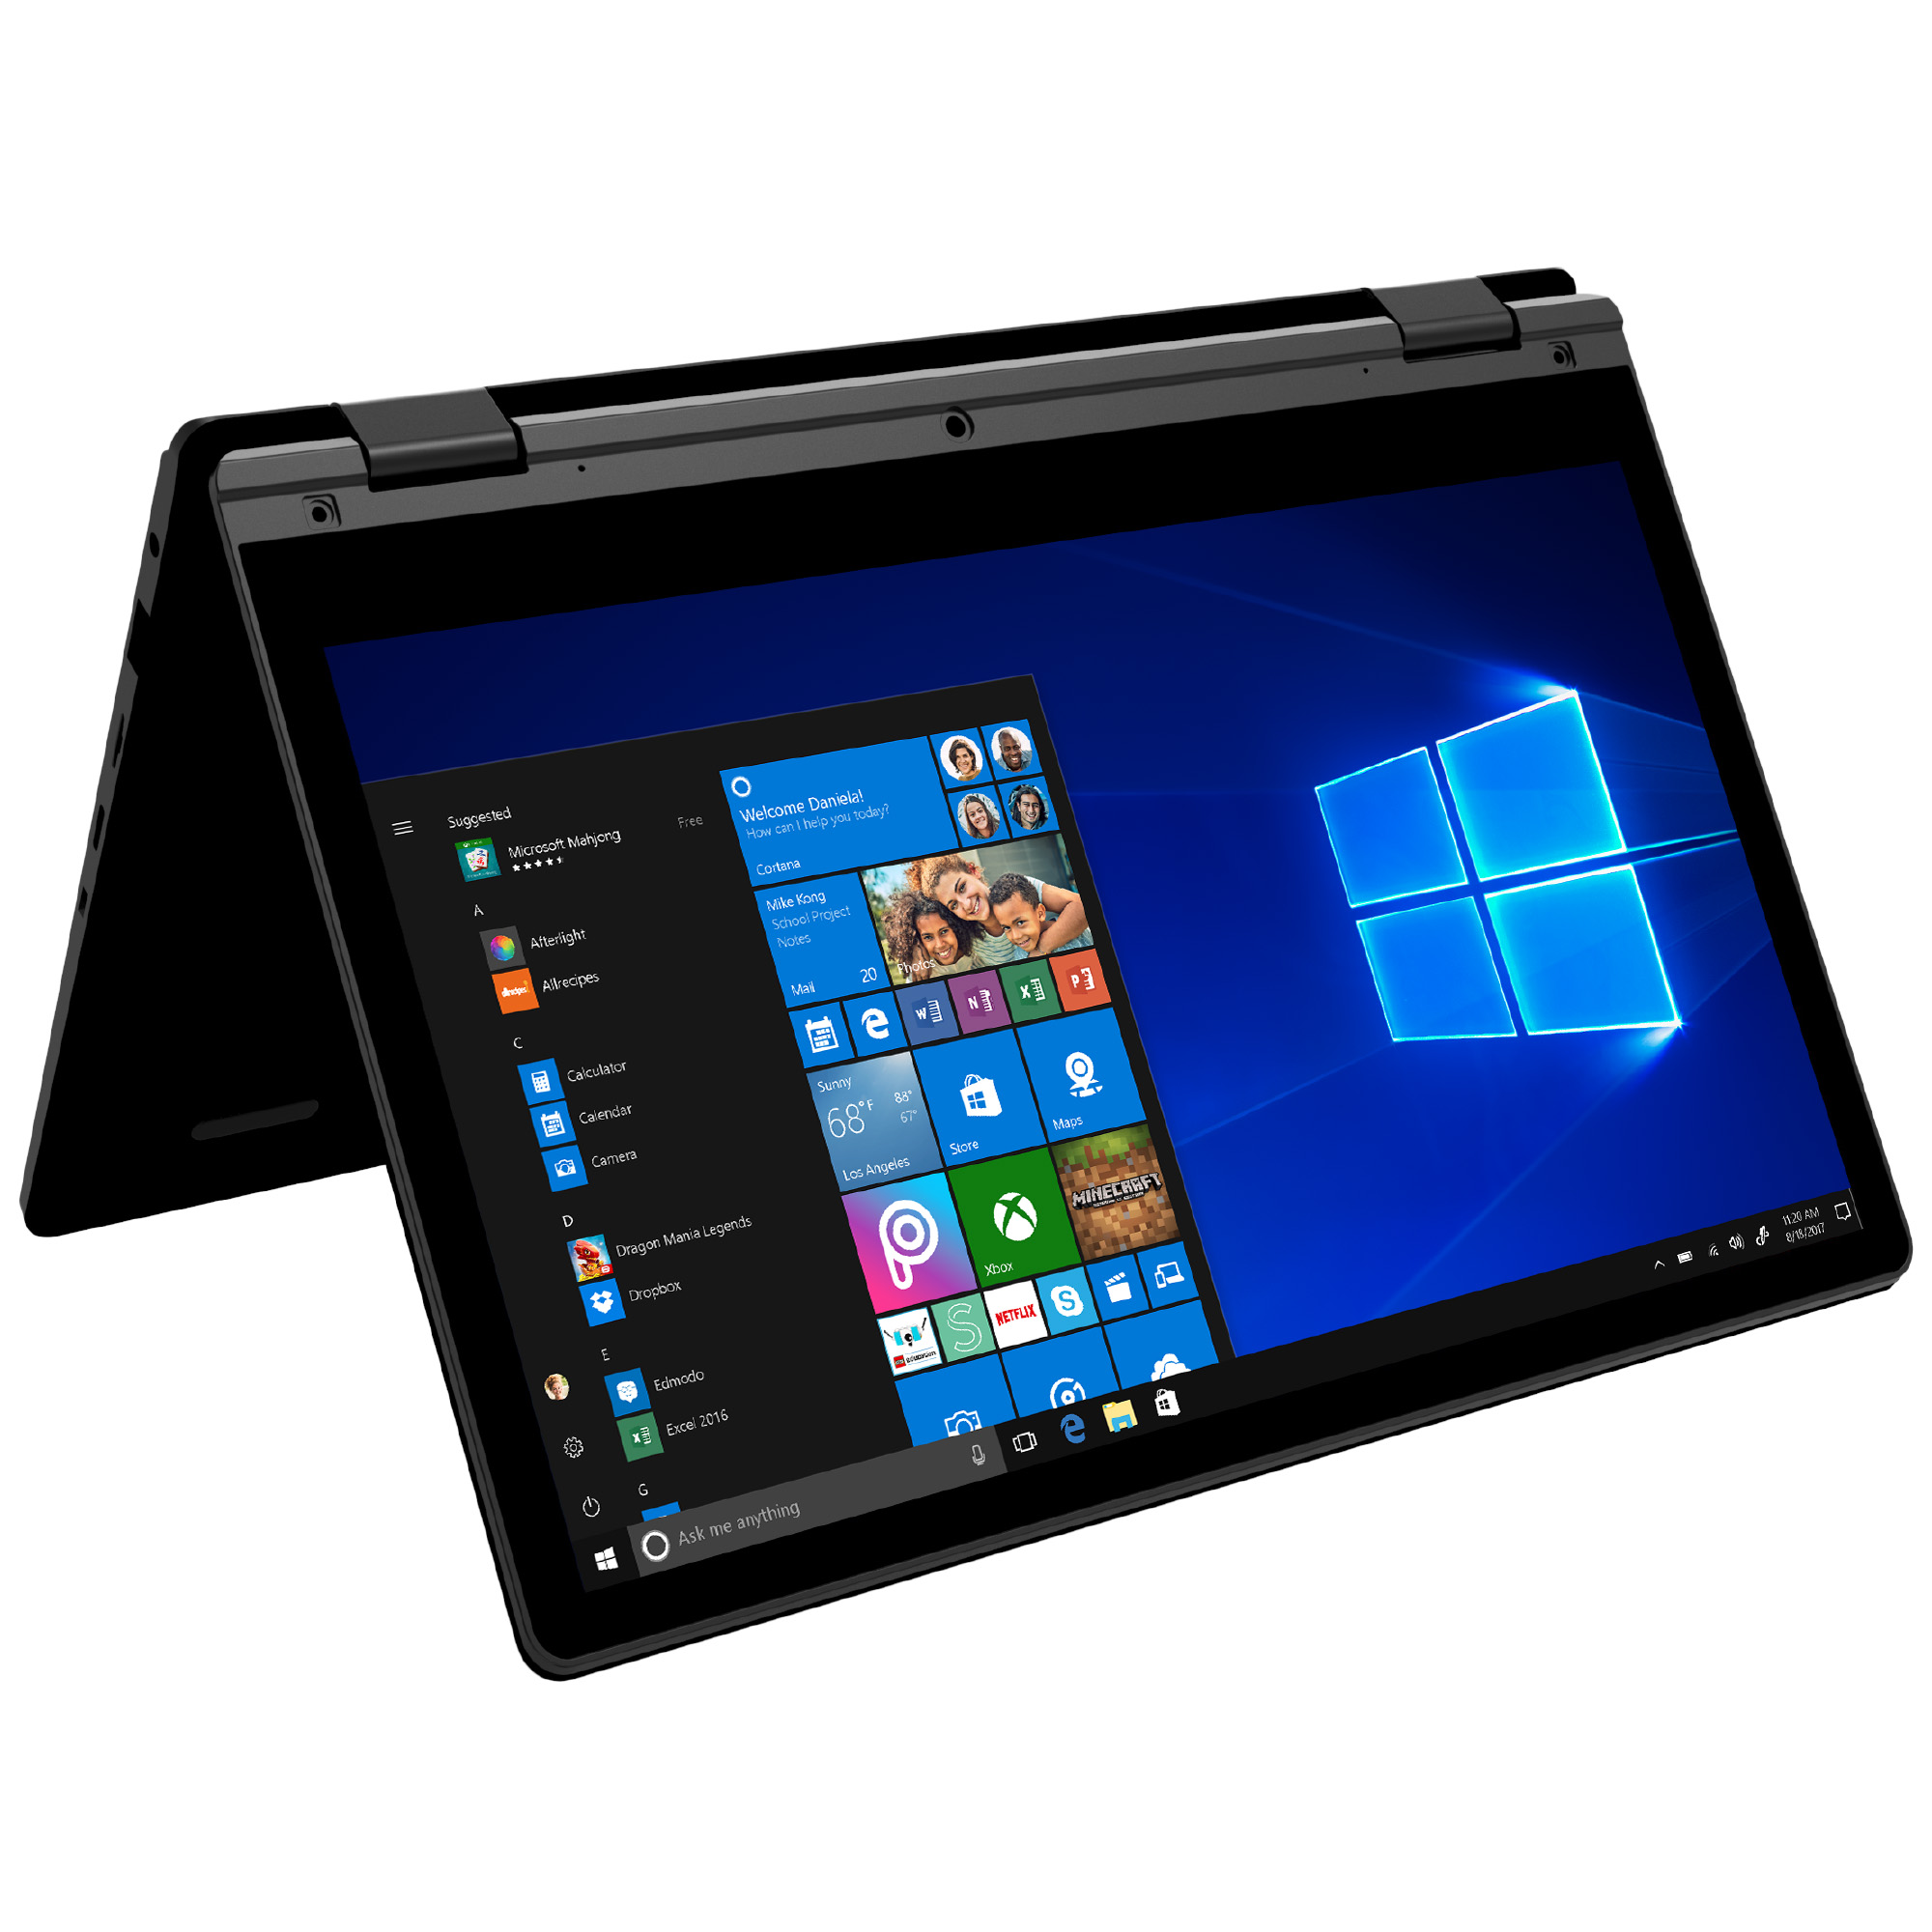 Ematic 11.6" Convertible Touchscreen Laptop with Windows 10 S, 2GB RAM, 32GB Storage, Black (EWT127BL) - image 4 of 13